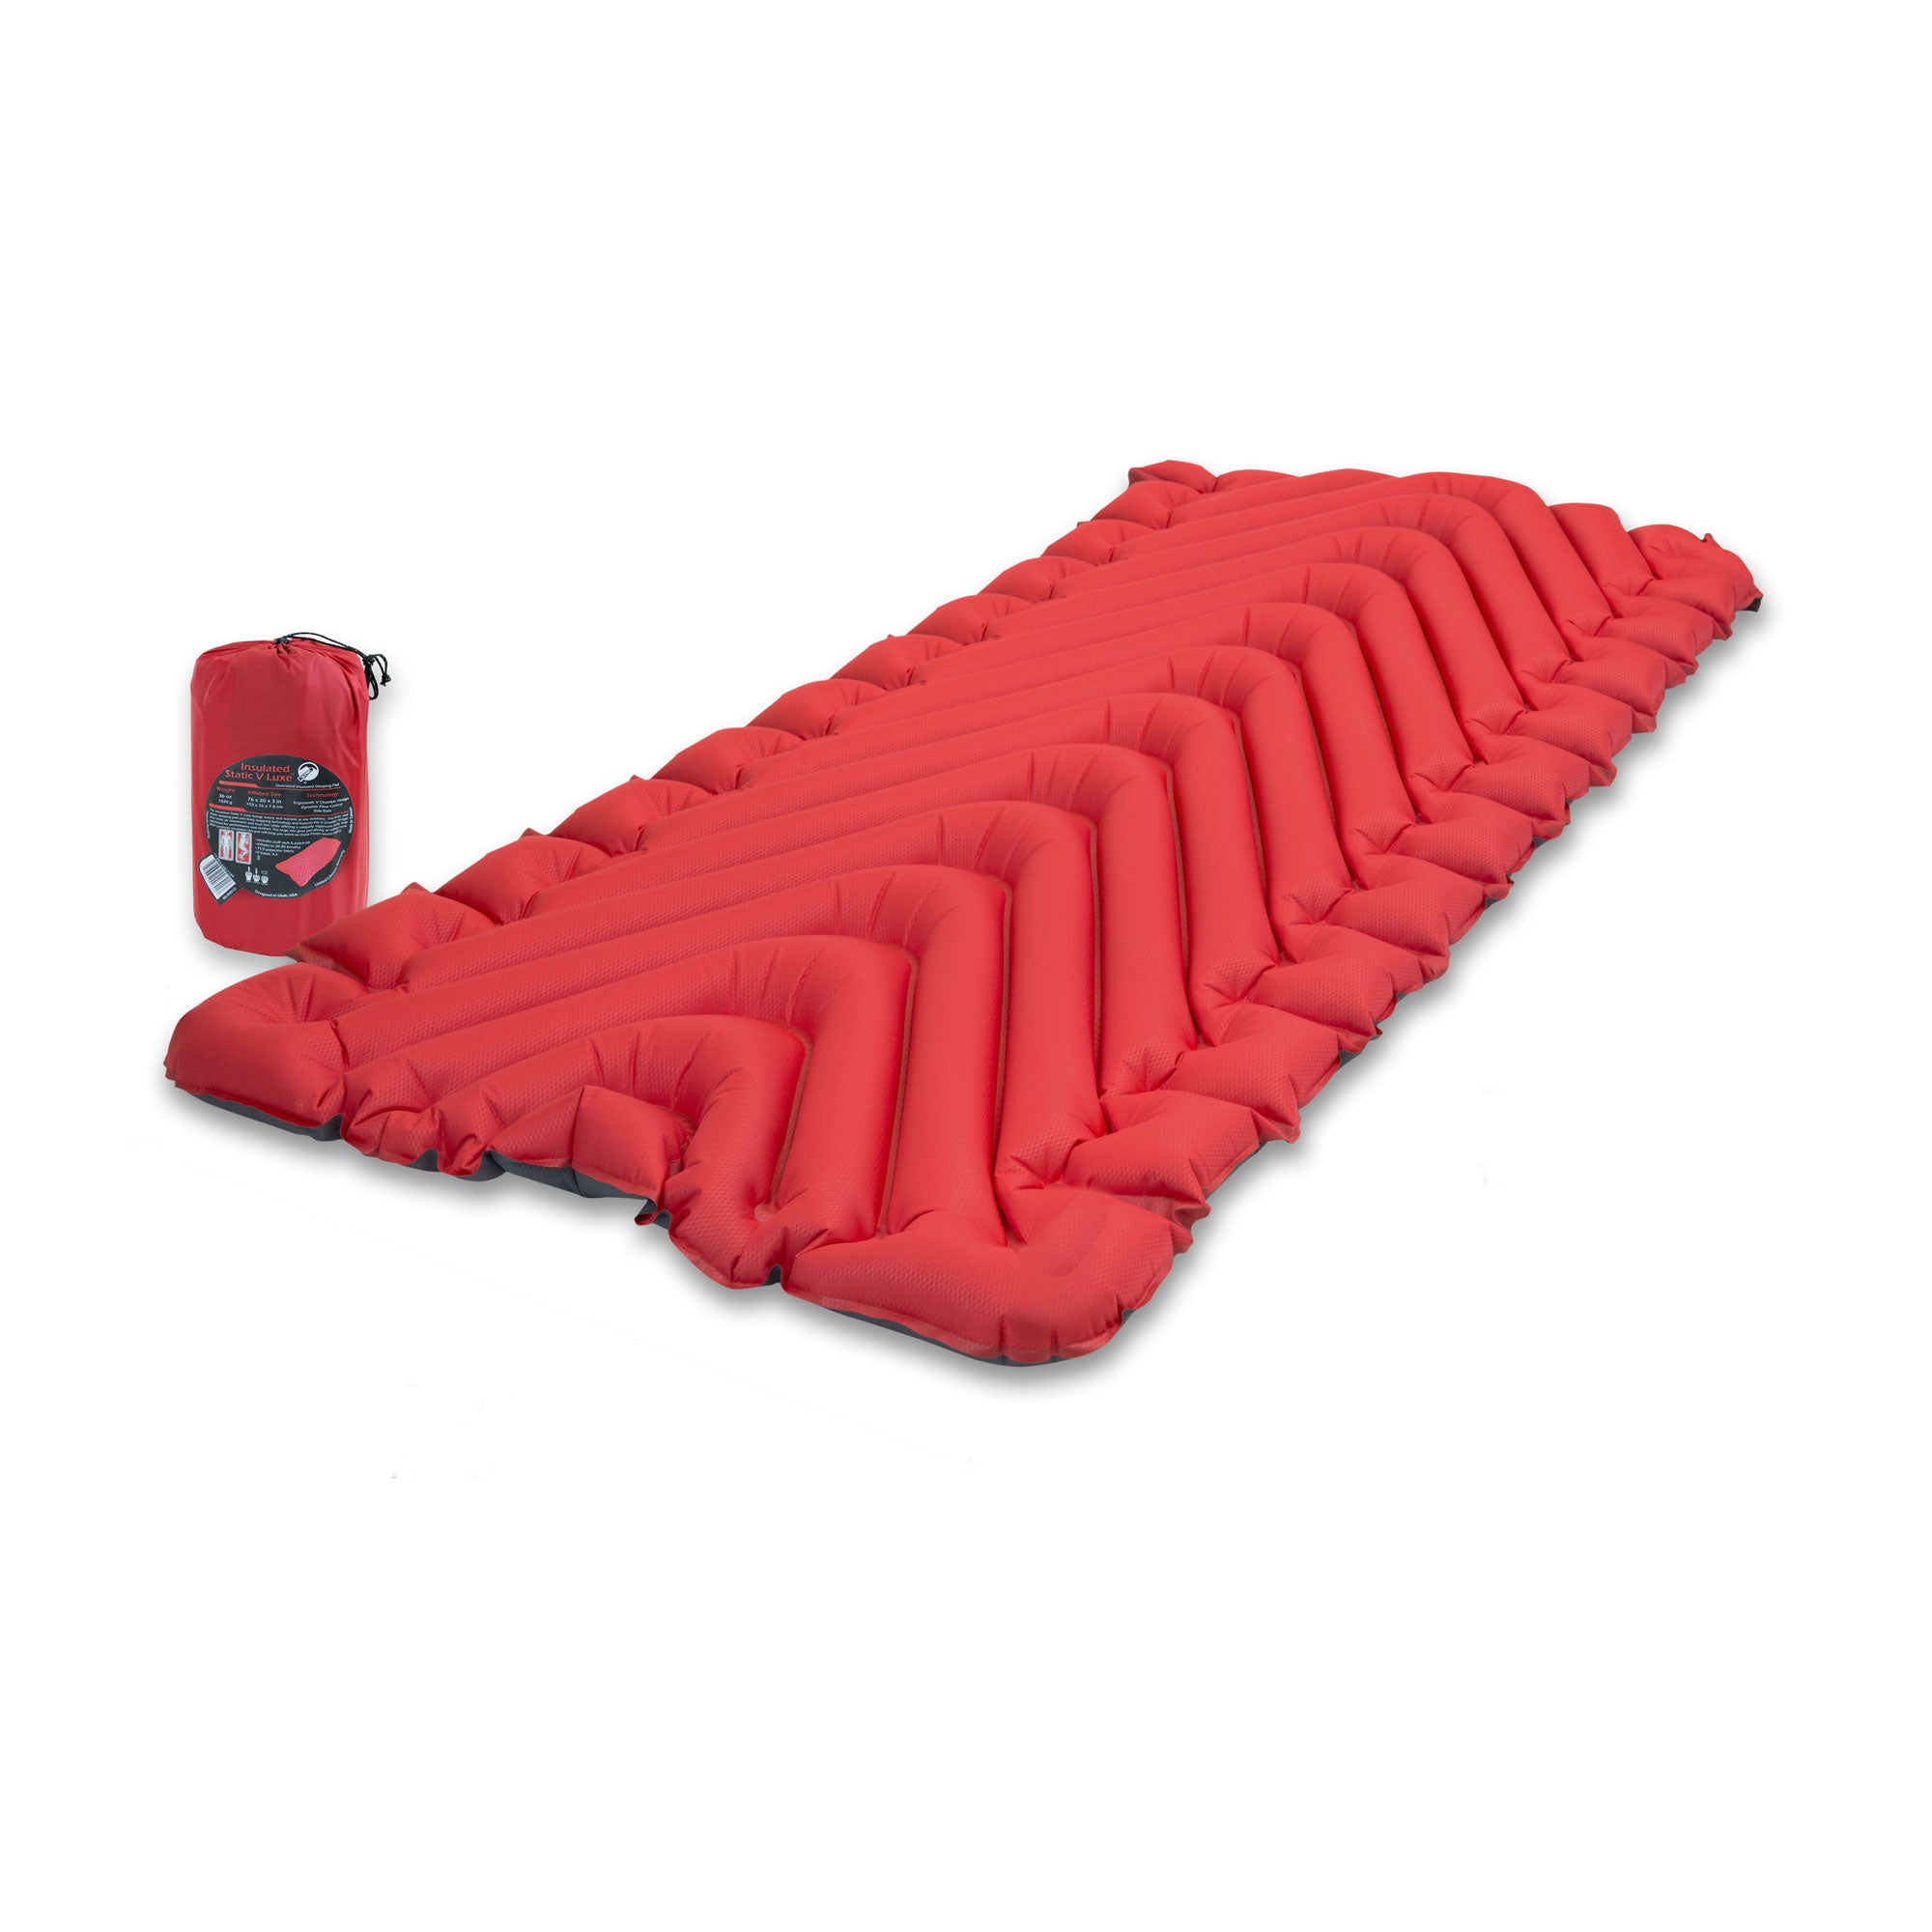 Insulated Static V Luxe Sleeping Pads